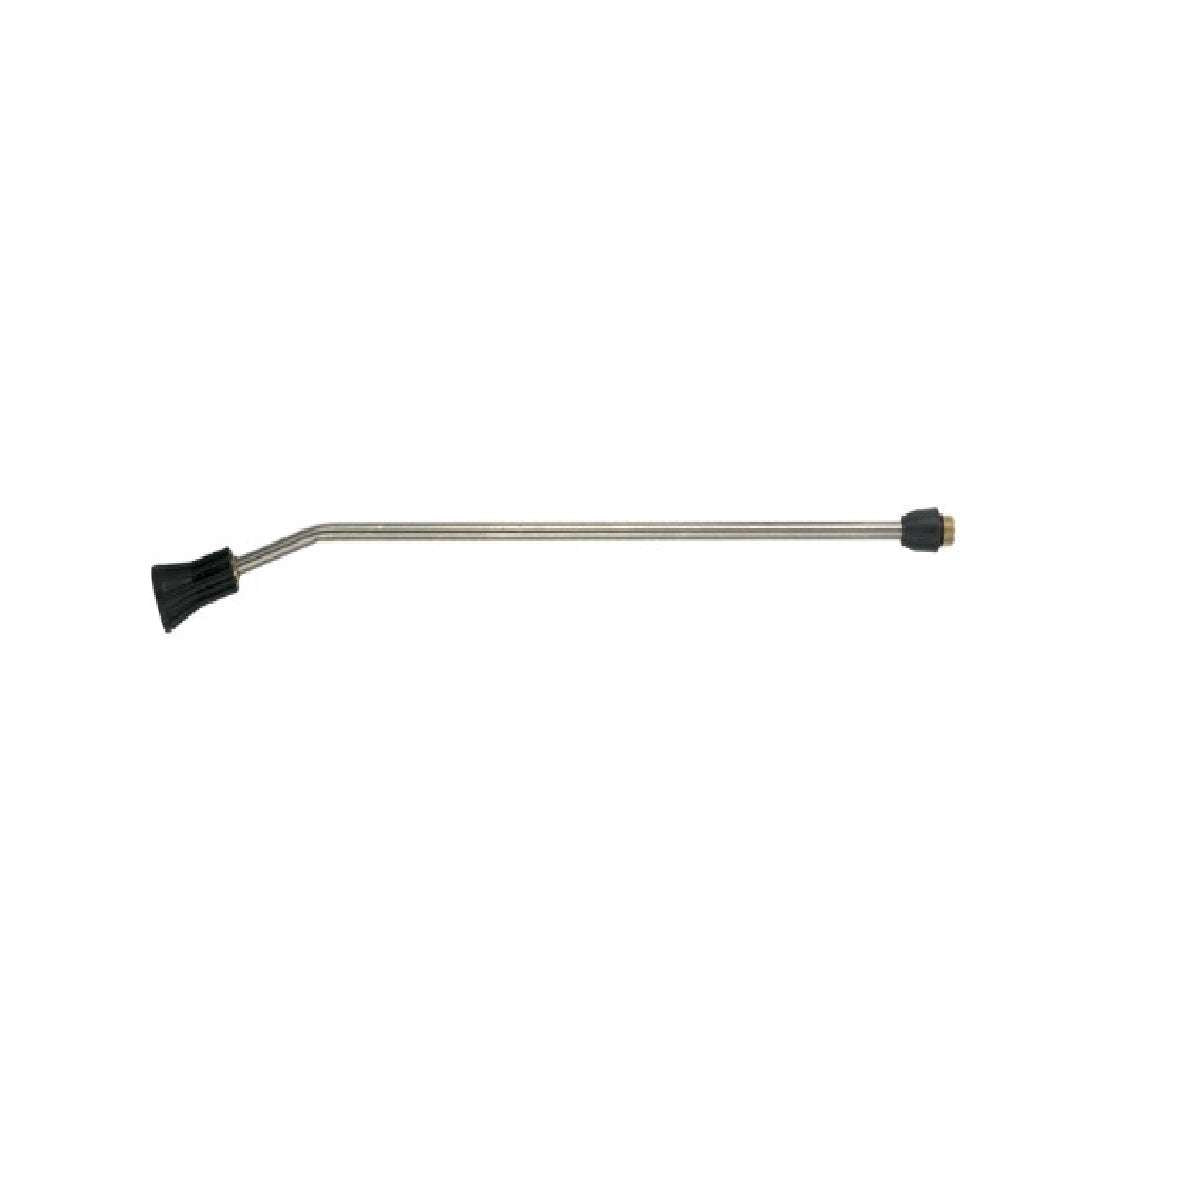 Lance with fixed head without nozzle (50 cm) 50690 - Annovi Reverberi